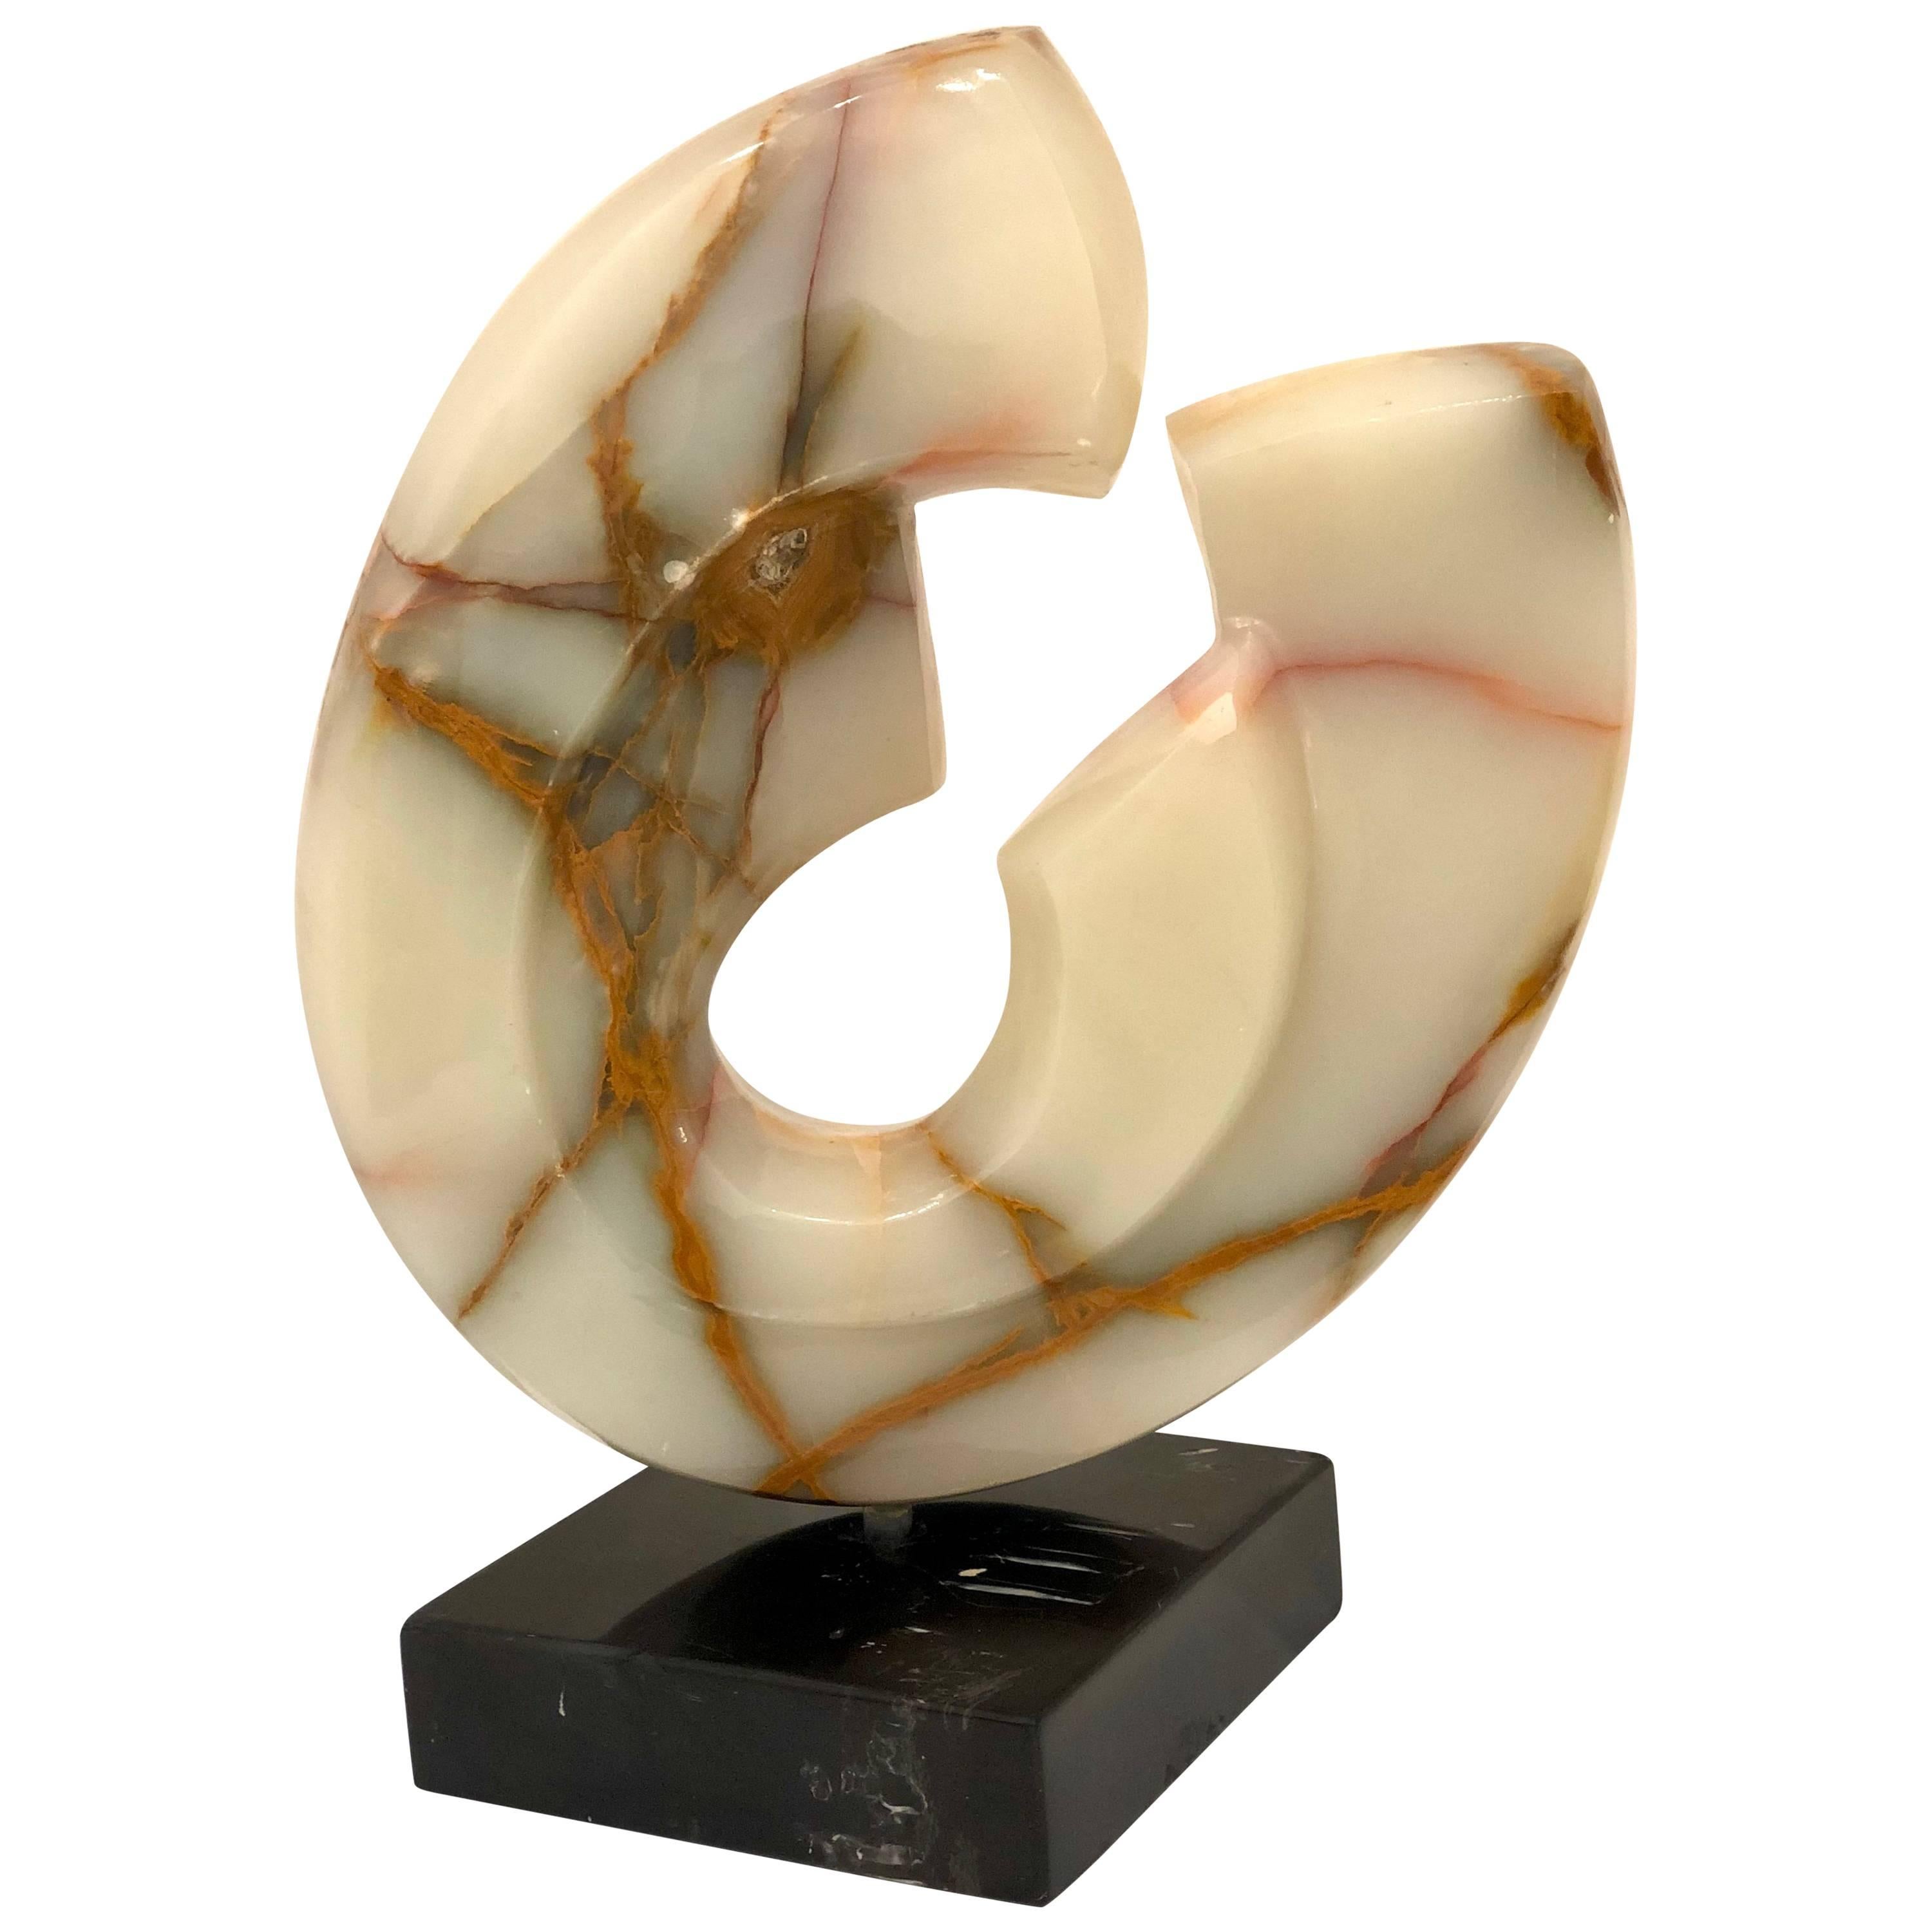 Modernist Abstract Carved Onyx Sculpture on Black Marble Base